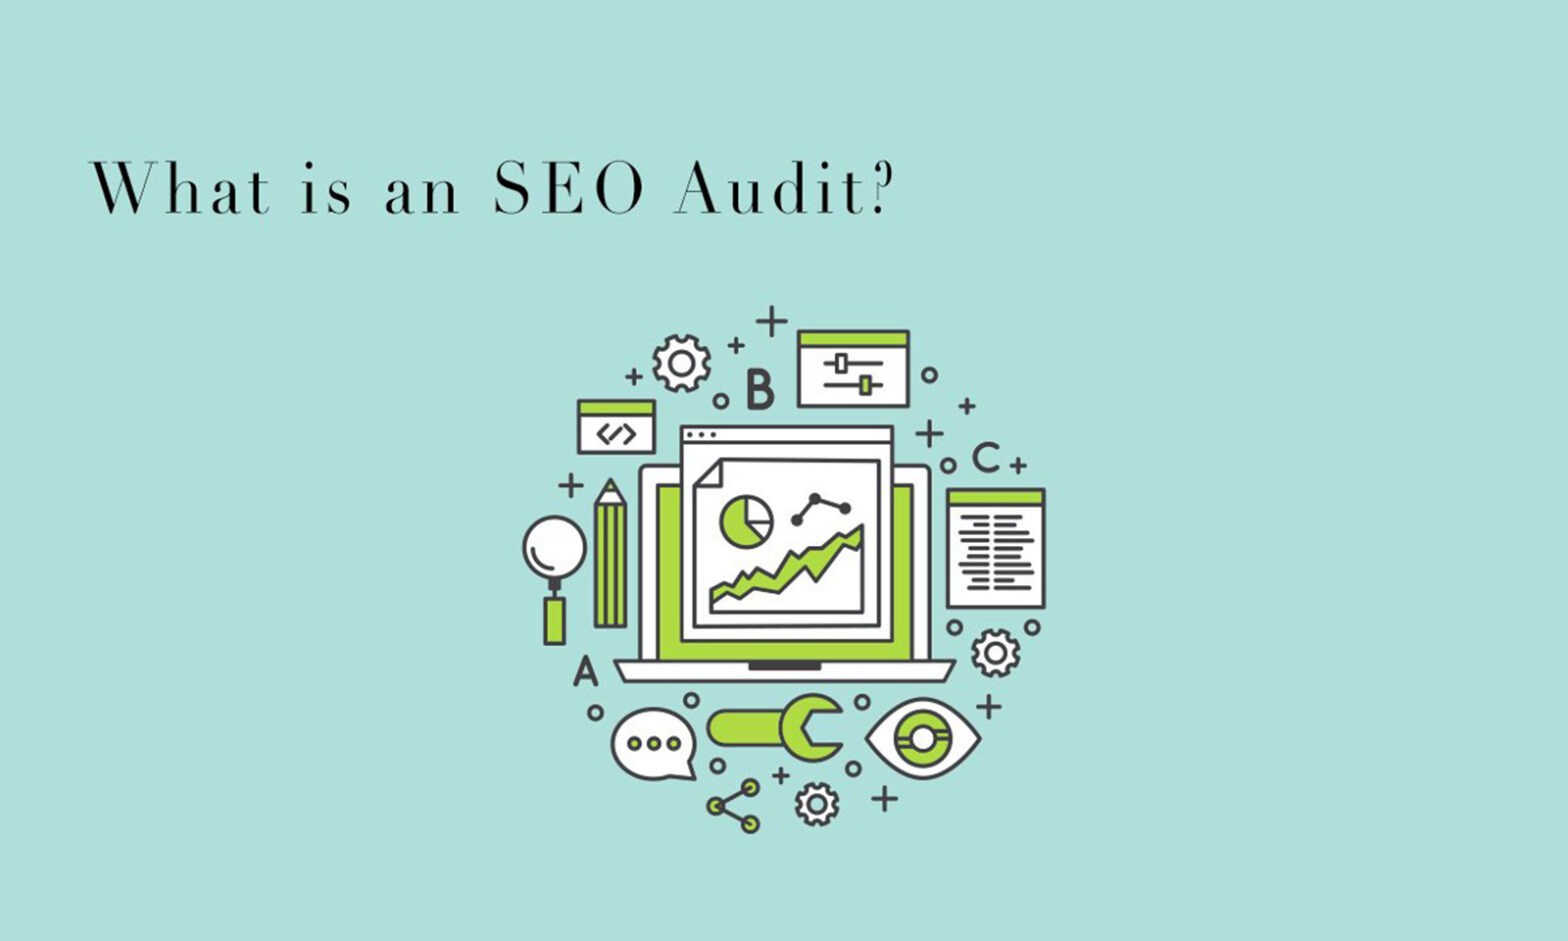 How To Do An SEO Audit On A Small Business Website